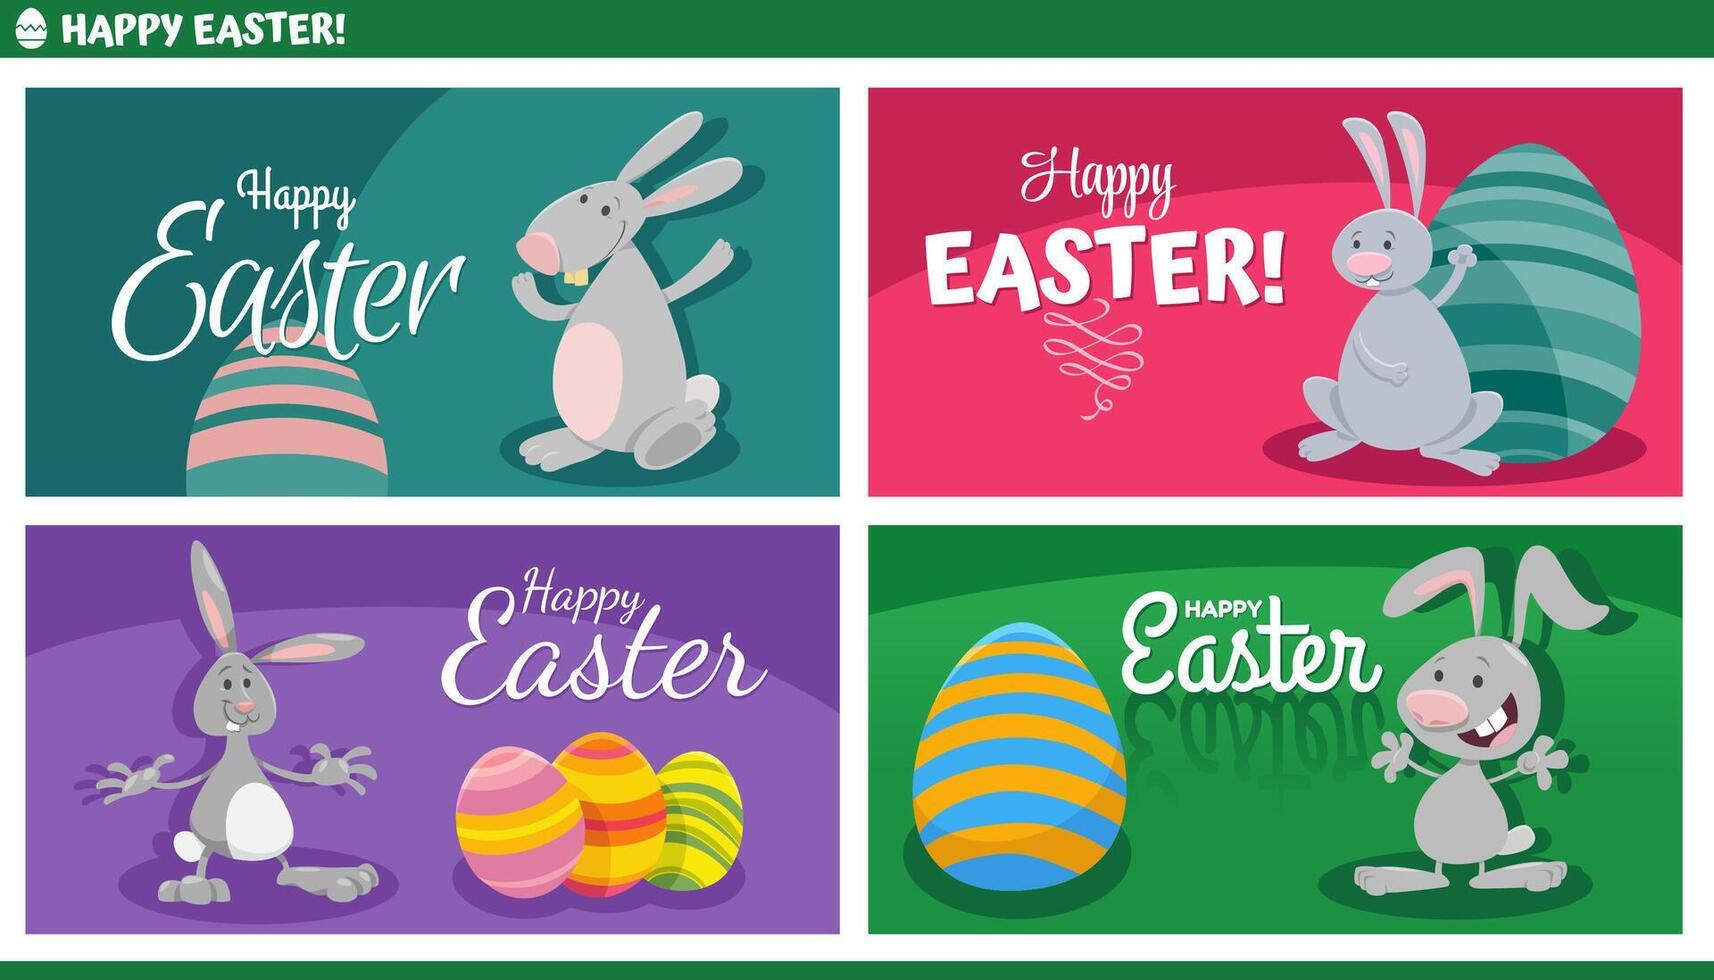 cartoon Easter bunnies with painted eggs greeting cards set vector